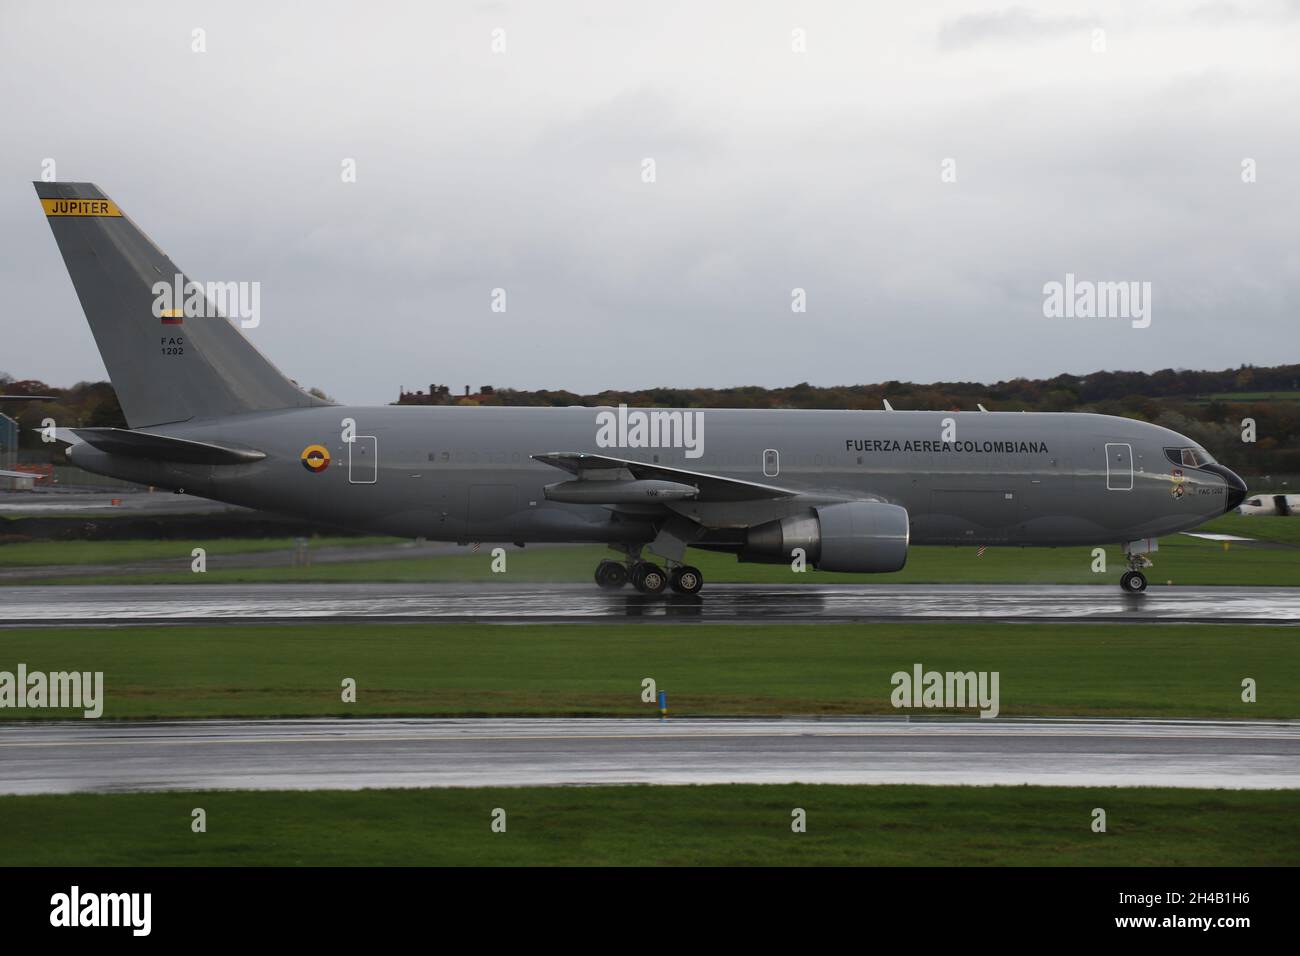 FAC 1202, a Boeing 767MMTT operated by the Colombian Air Force (Fuerza Aérea Colombiana - FAC), on arrival at Prestwick International Airport in Ayrshire, Scotland. The aircraft brought President Duque and other Colombian delegates to Scotland, for the COP26 summit taking place in Glasgow. Stock Photo